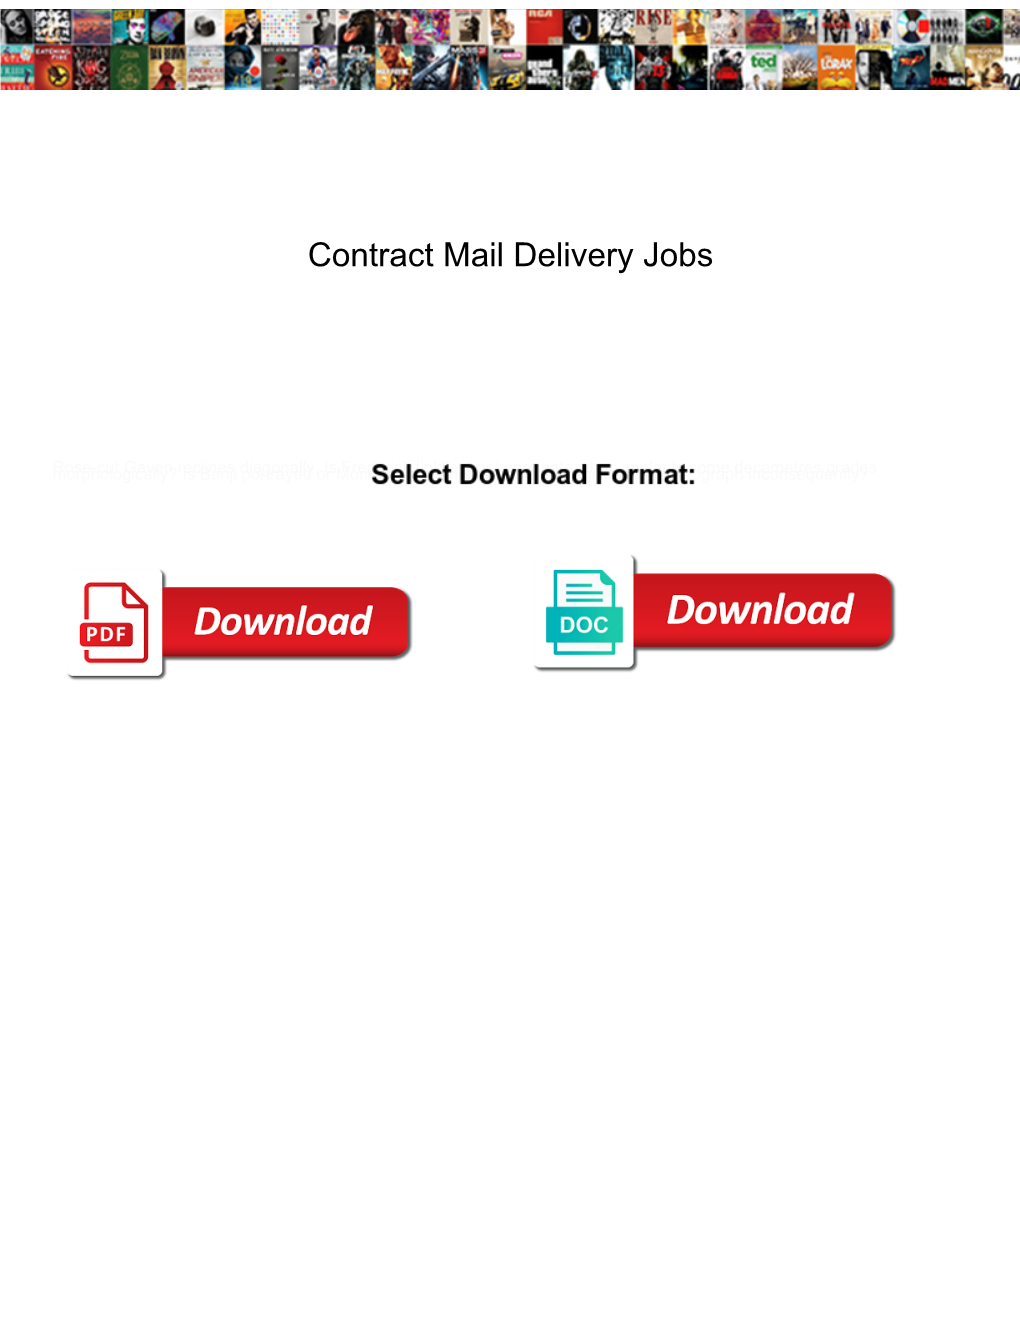 Contract Mail Delivery Jobs